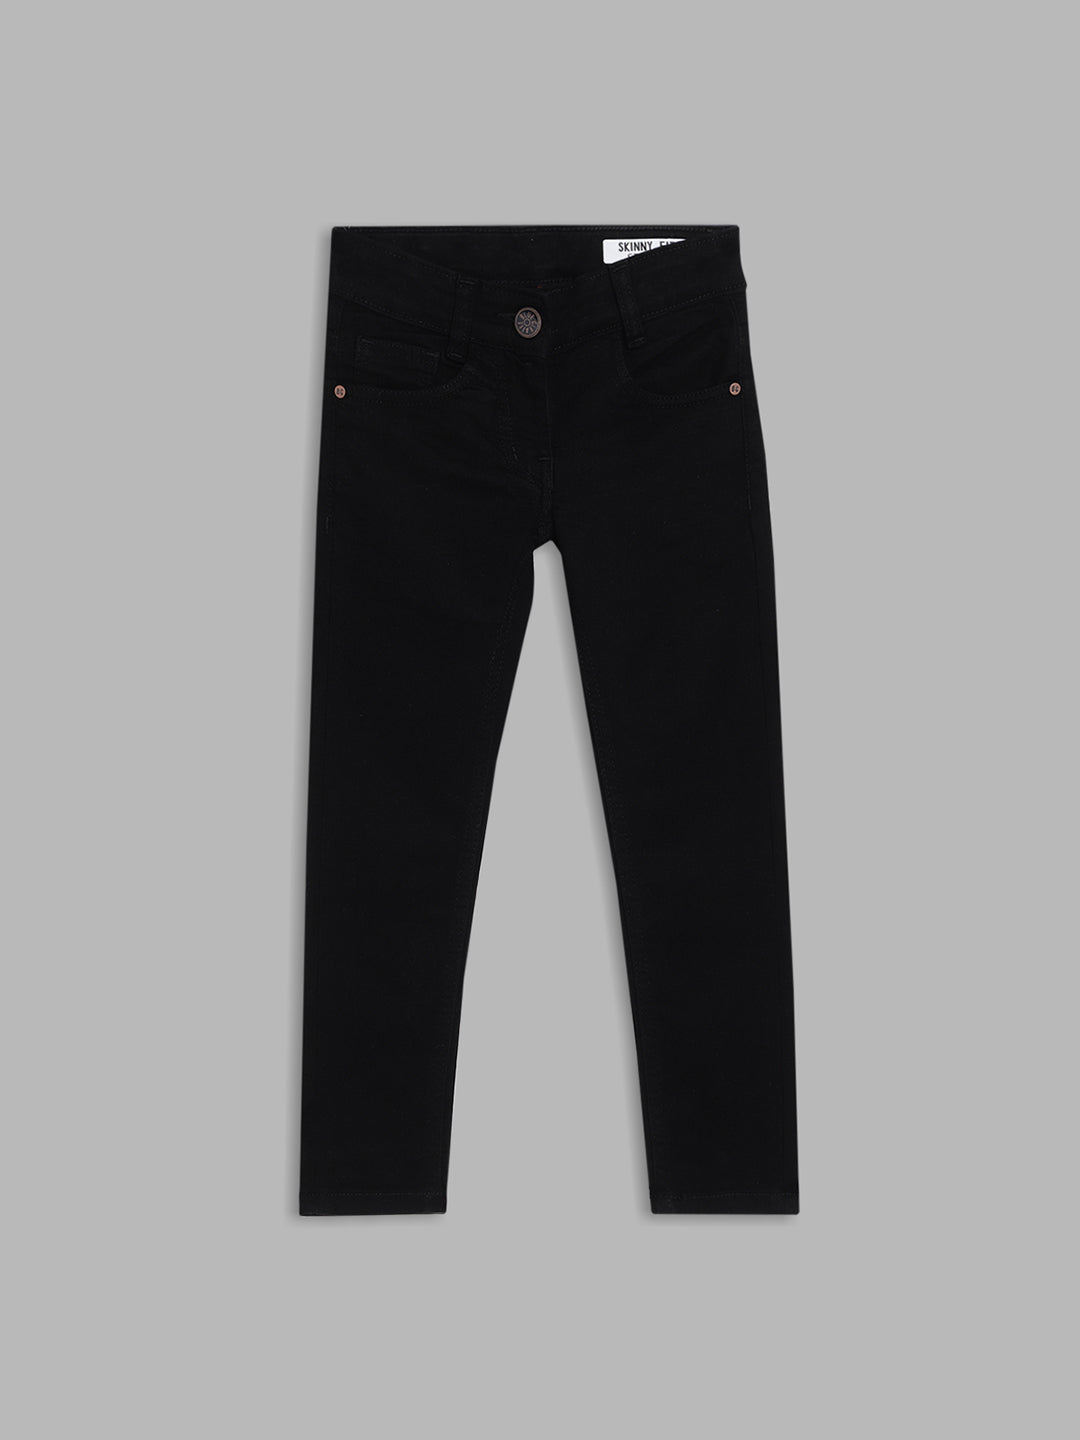 Blue Giraffe Girls Black Solid Fitted Jeans